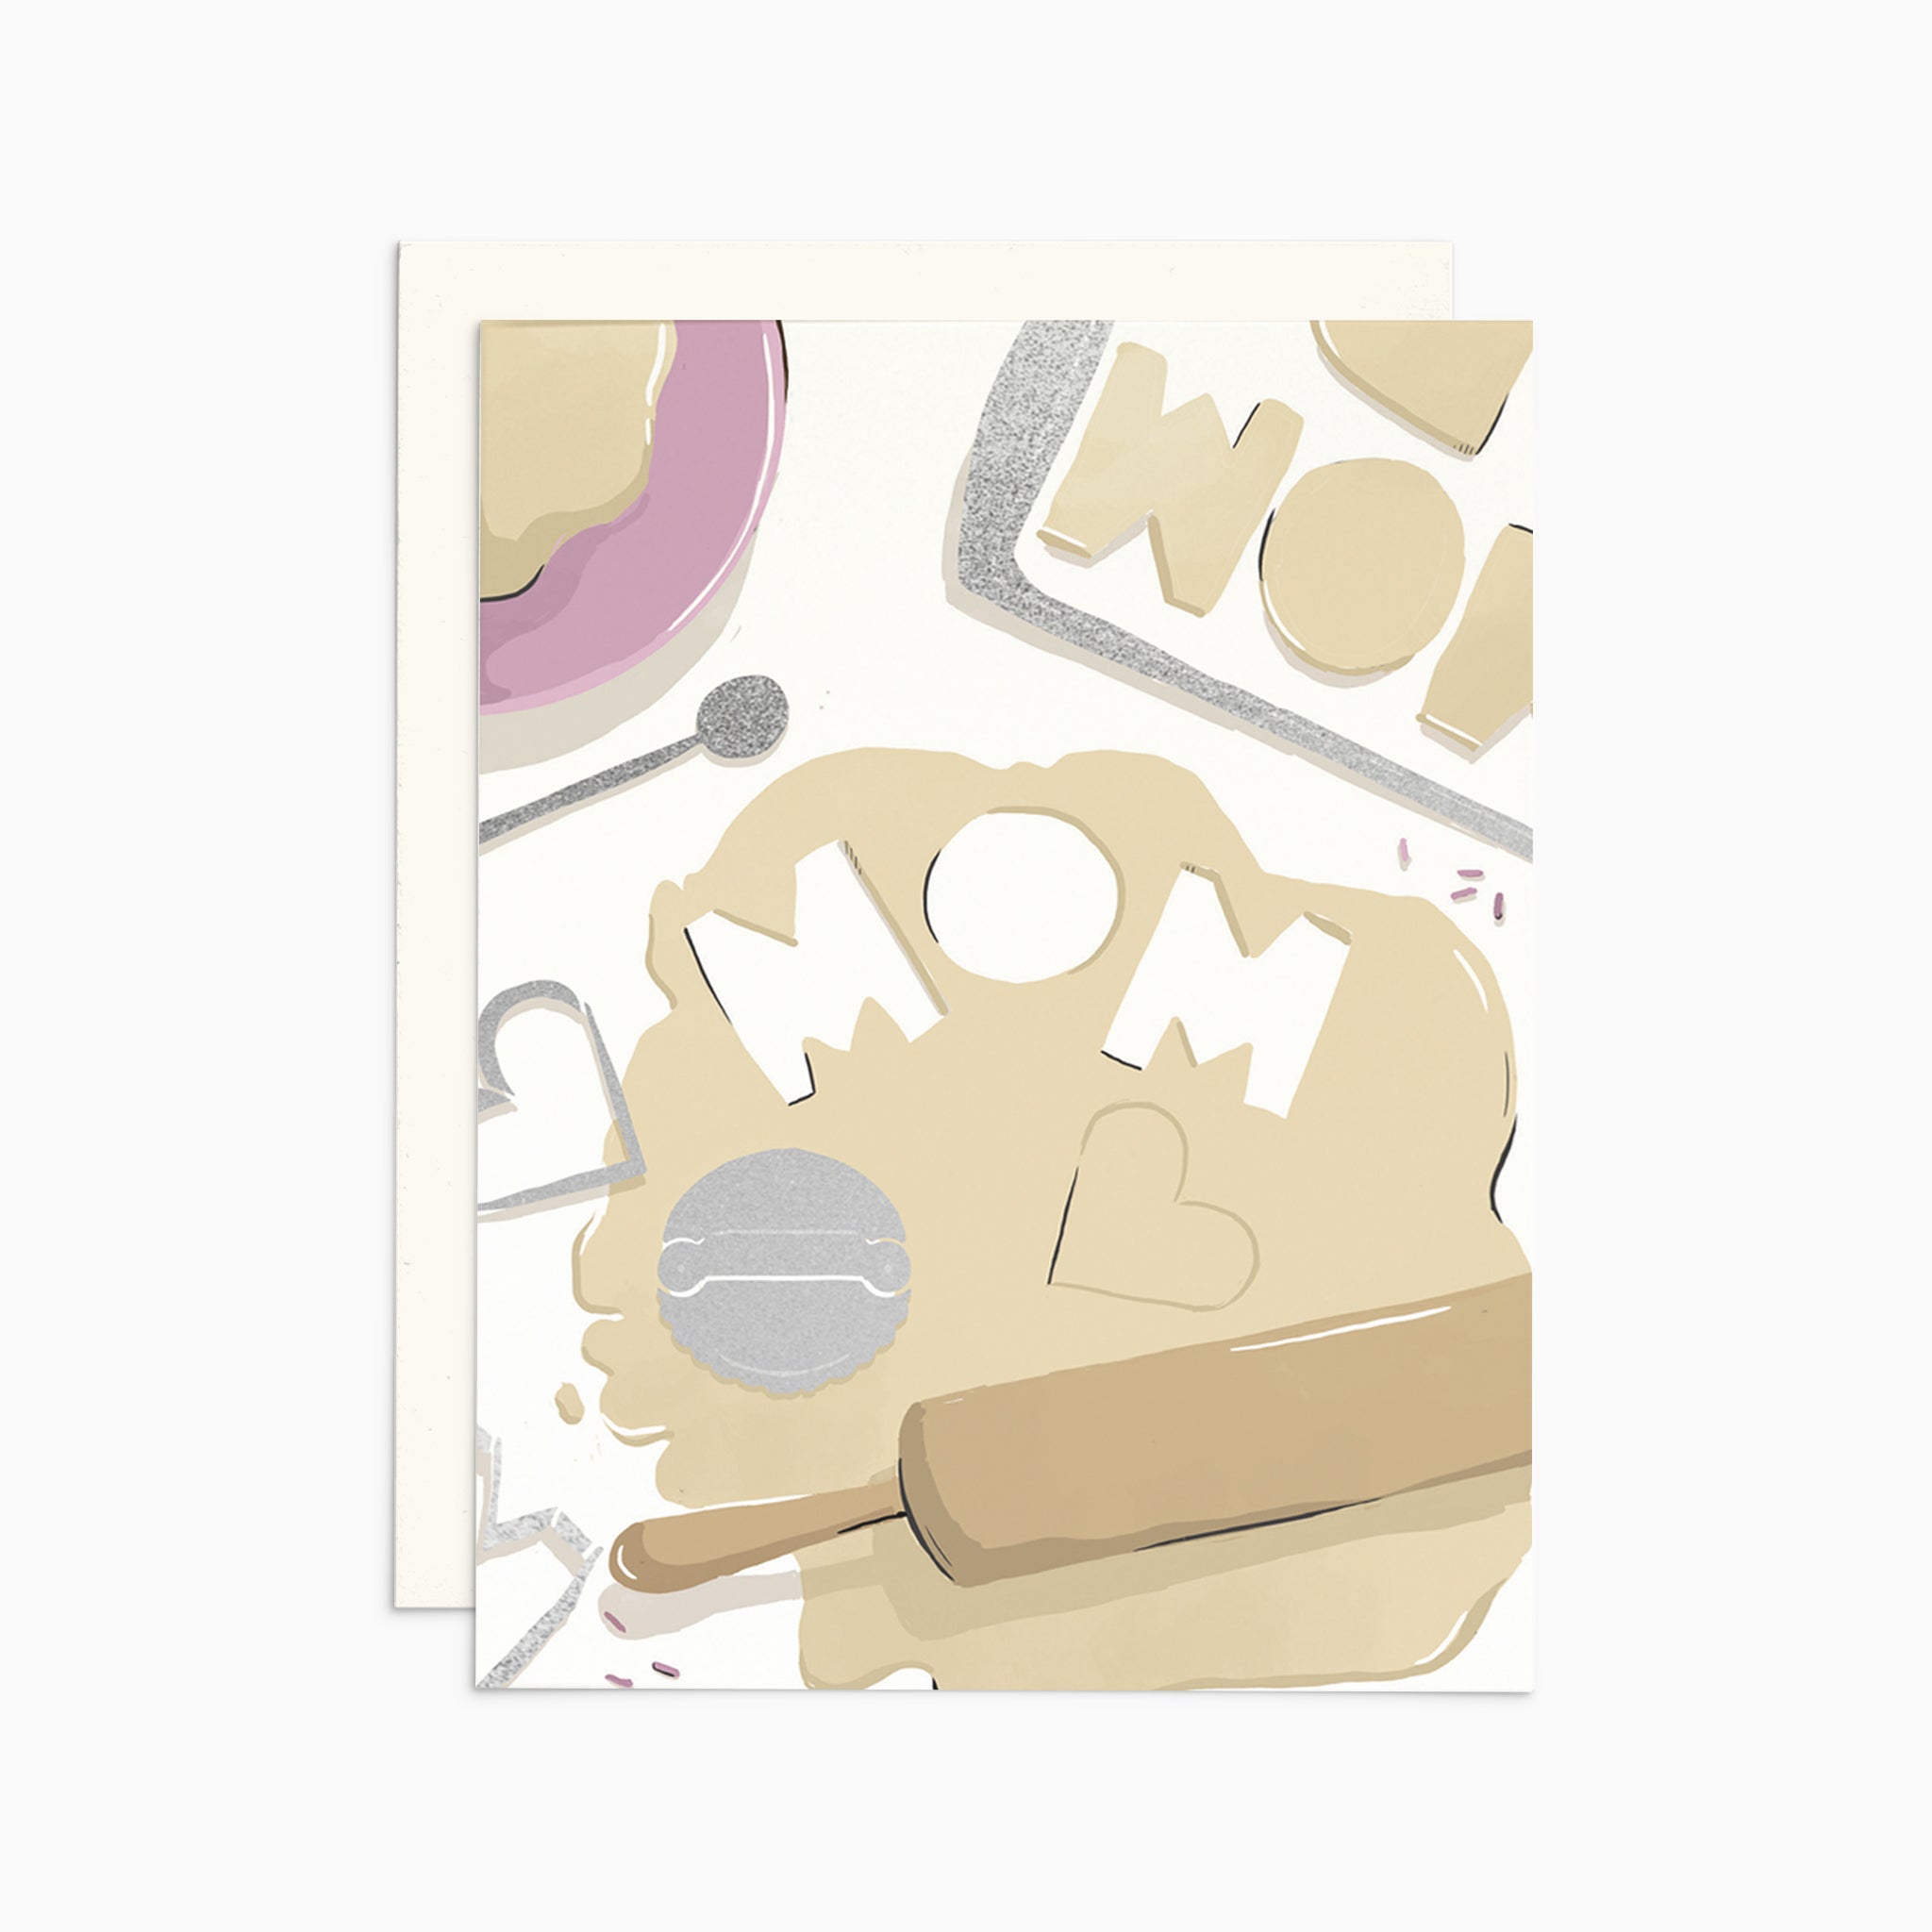 Illustrated Mother's Day card on warm white premium cardstock, featuring rolled-out cookie dough with the word 'Mom' cut out, symbolizing the sweetness and love of a mother's special touch.